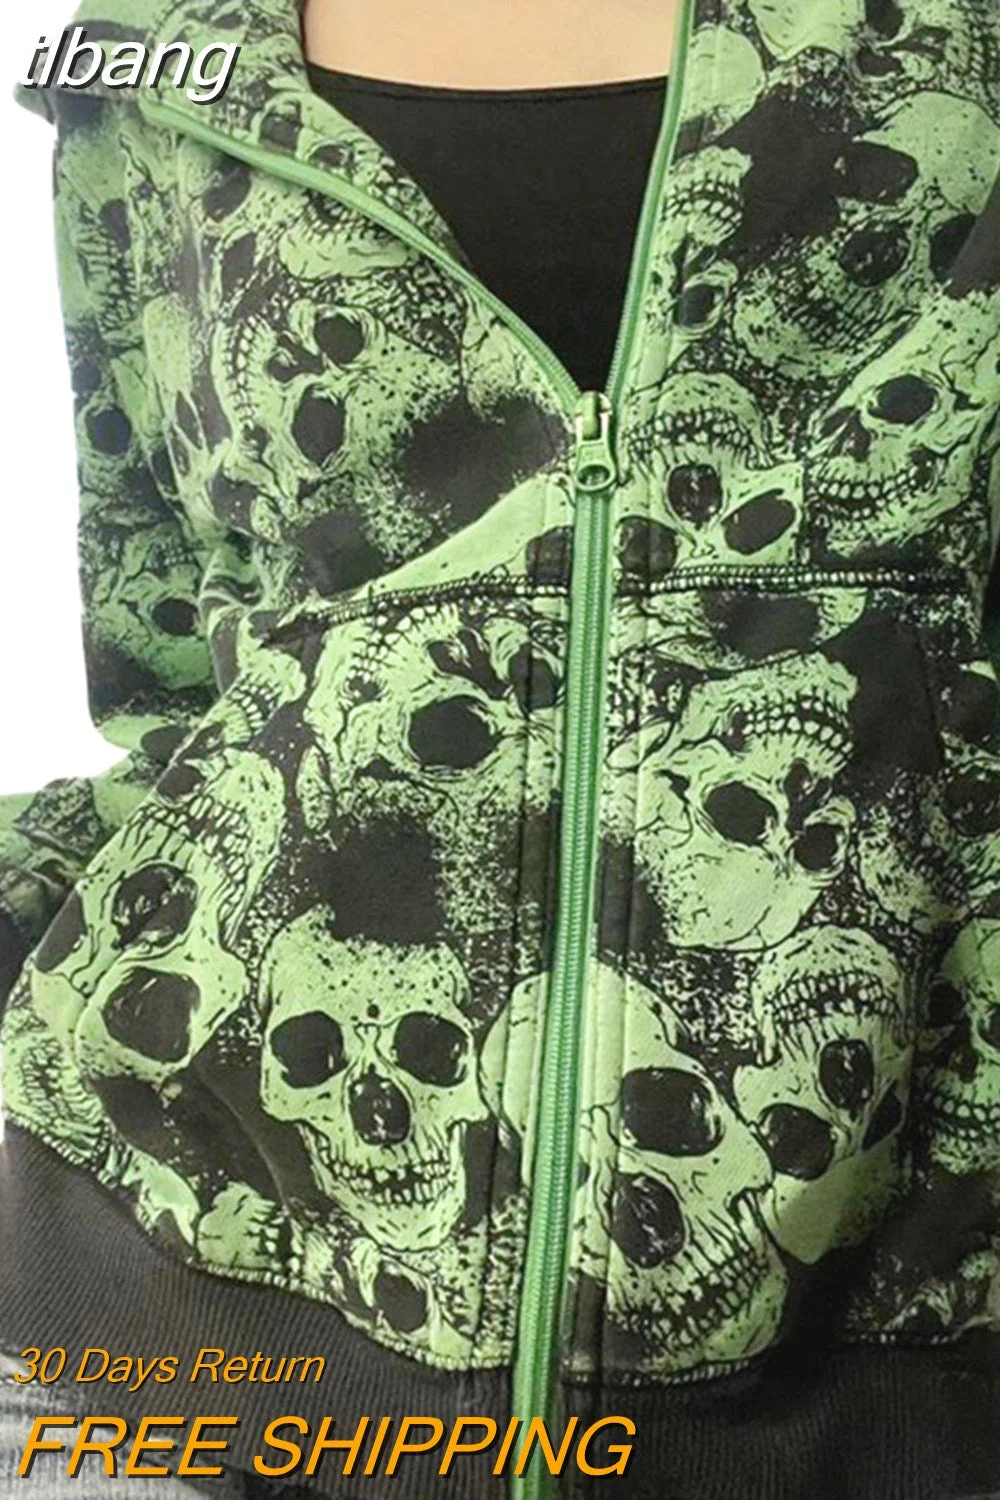 tlbang Skull Sweatshirt Green Graphic Long Sleeve Hooded Tops with Pockets y2k Aesthetic Hoodie Women 2000s Gothic Punk Coat